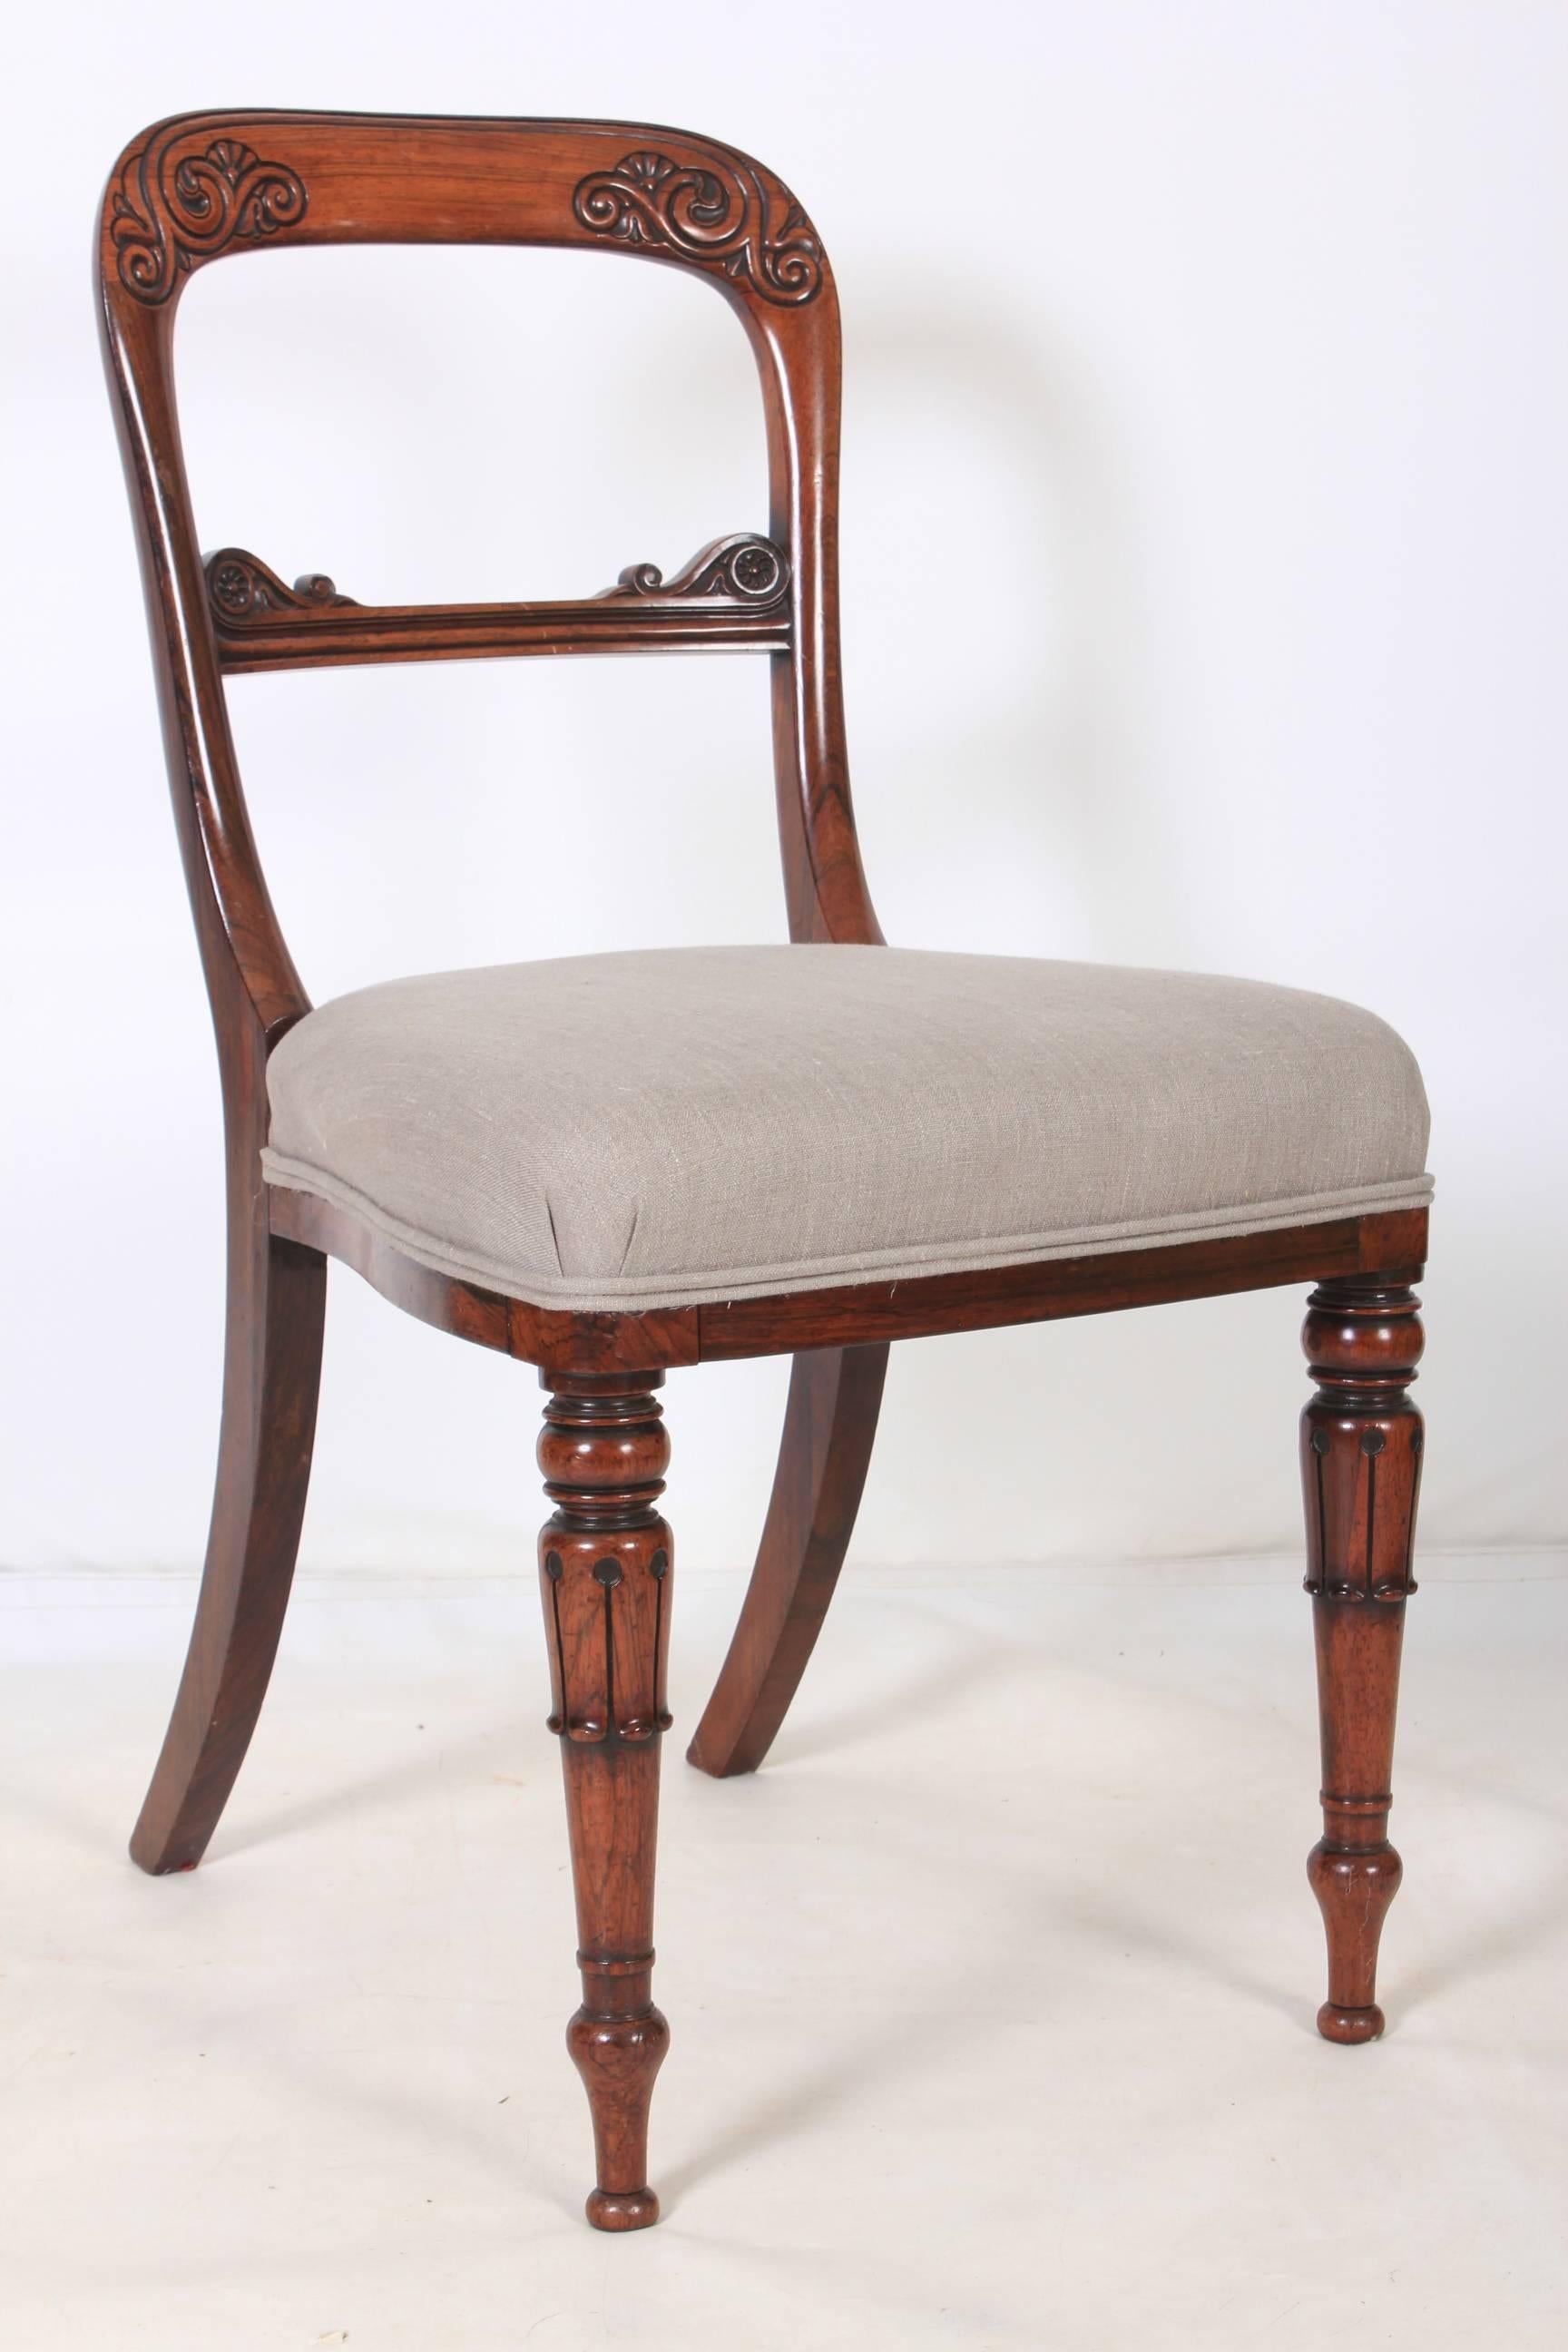 English, circa 1825.
This William IV set of dining chairs are in showroom condition and of great quality.
A very heavy and solid set of chairs, with beautiful carved backs and newly upholstered seats.
Professionally upholstered in a neutral grey